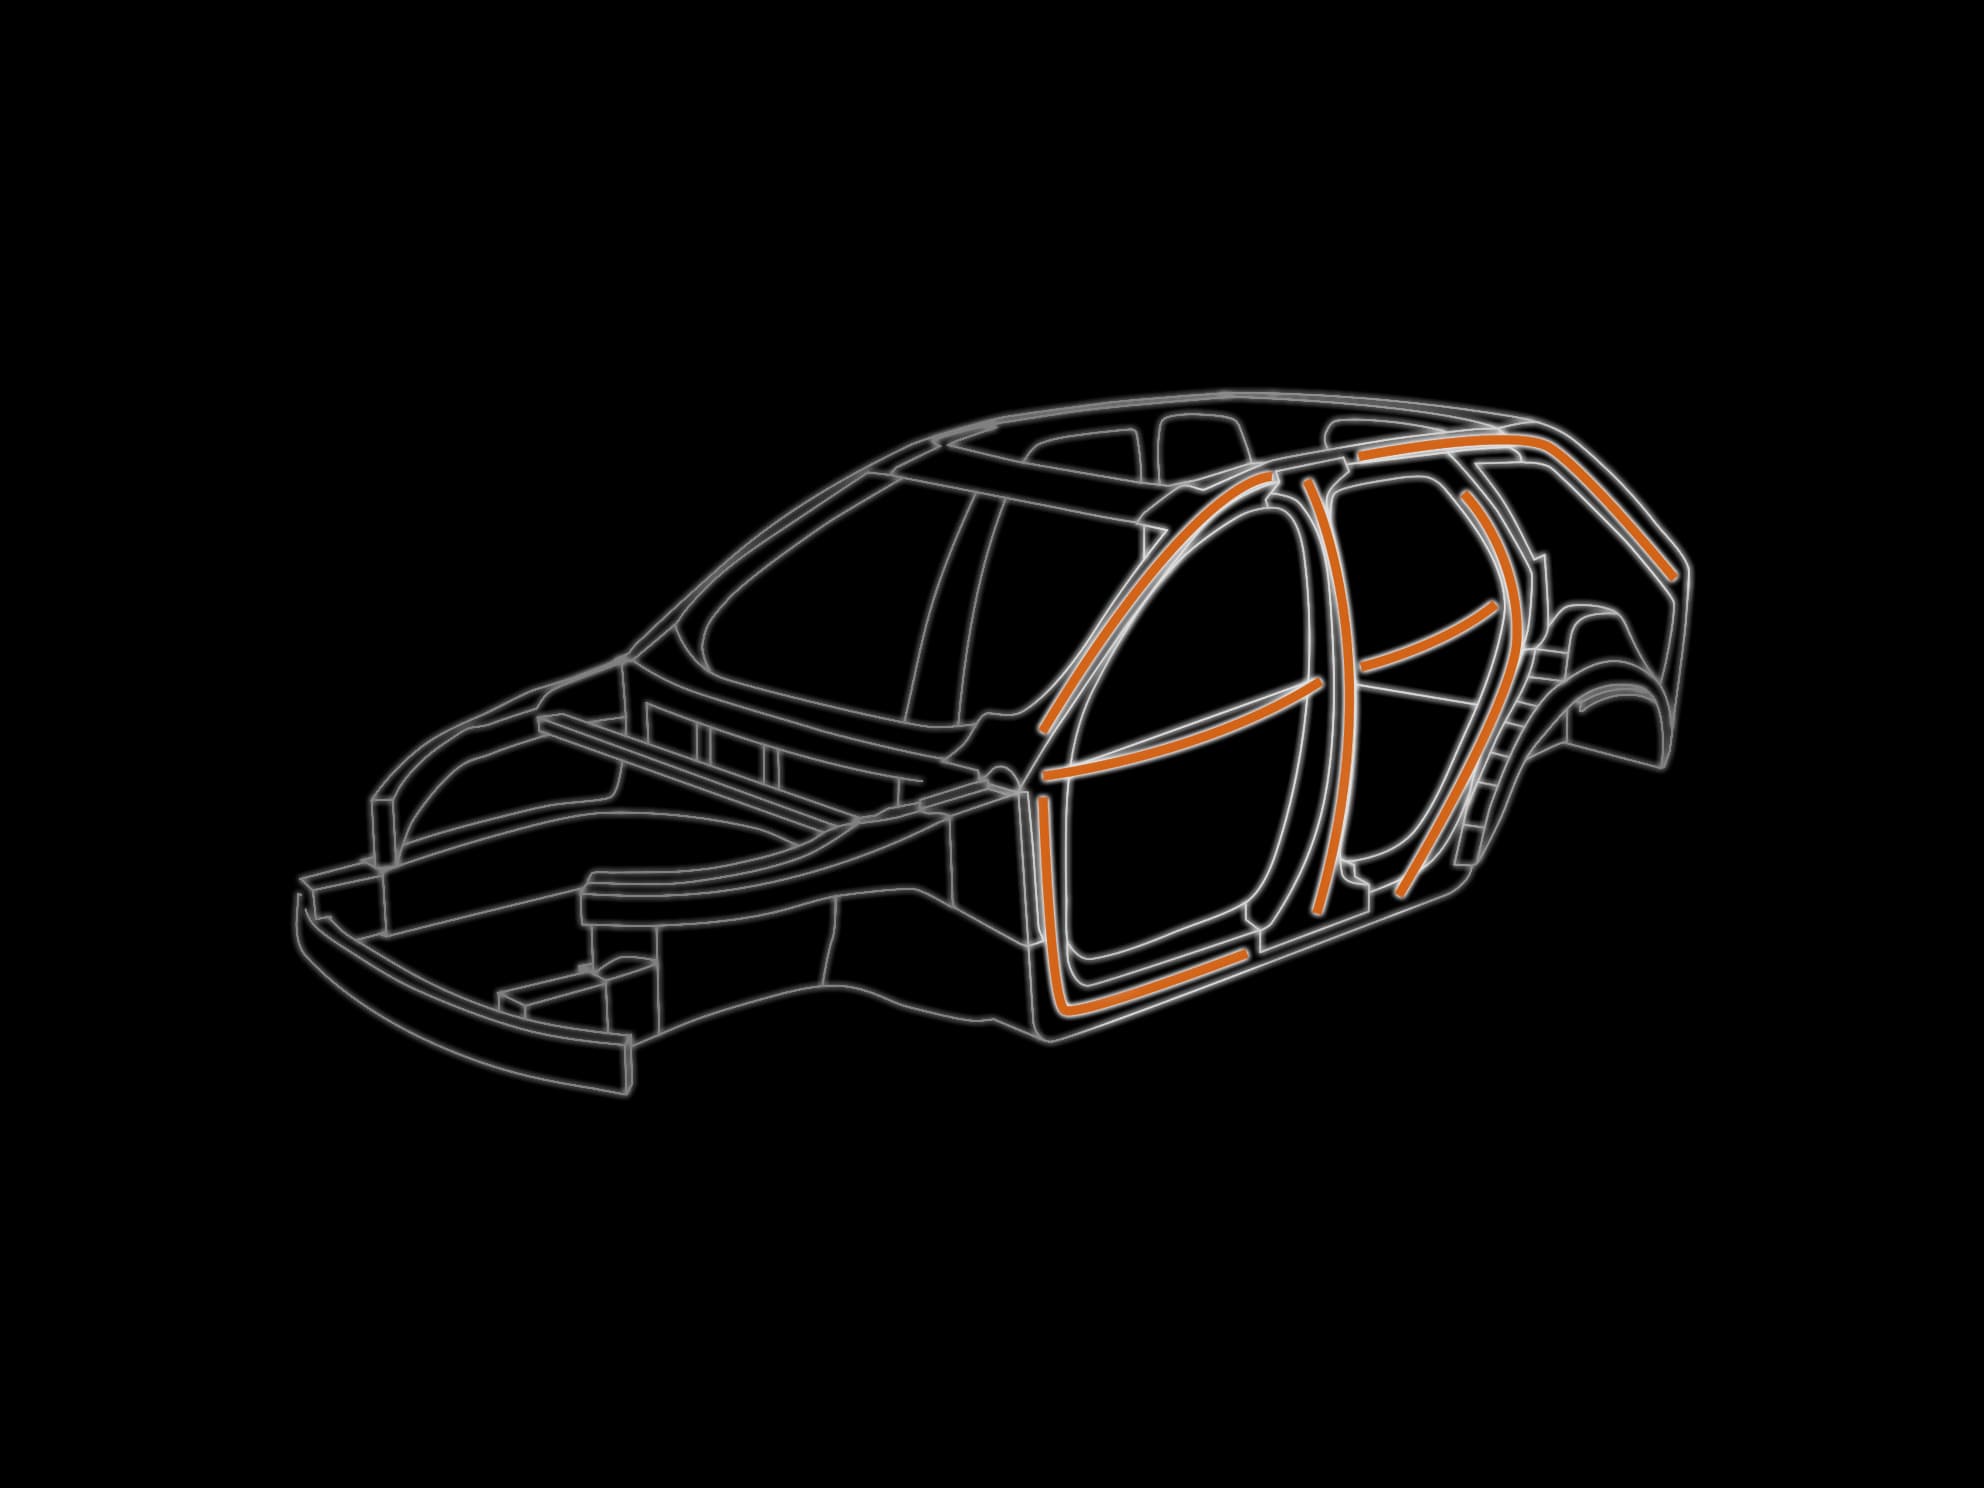 A digital outline of a car chassis